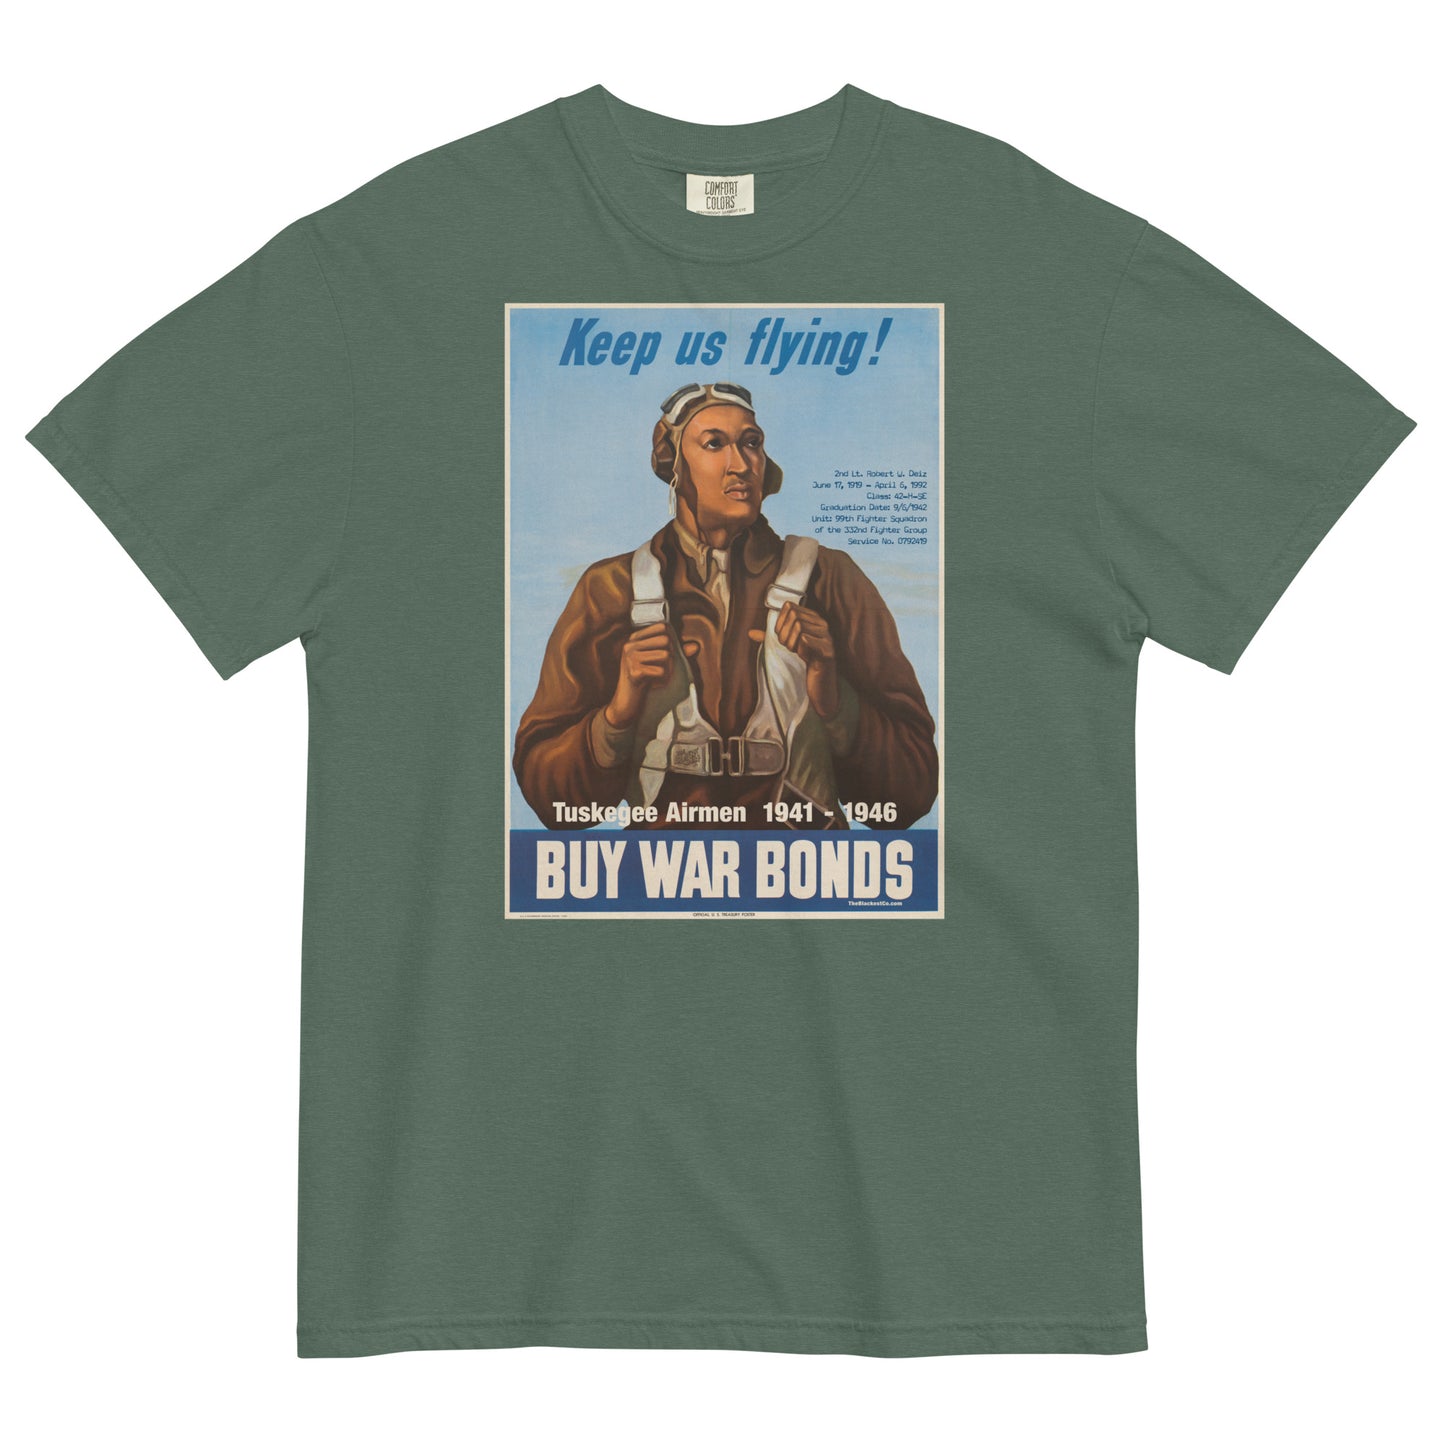 spruce green t shirt with the image of an african american wwii pilot and tuskegee airmen written on it